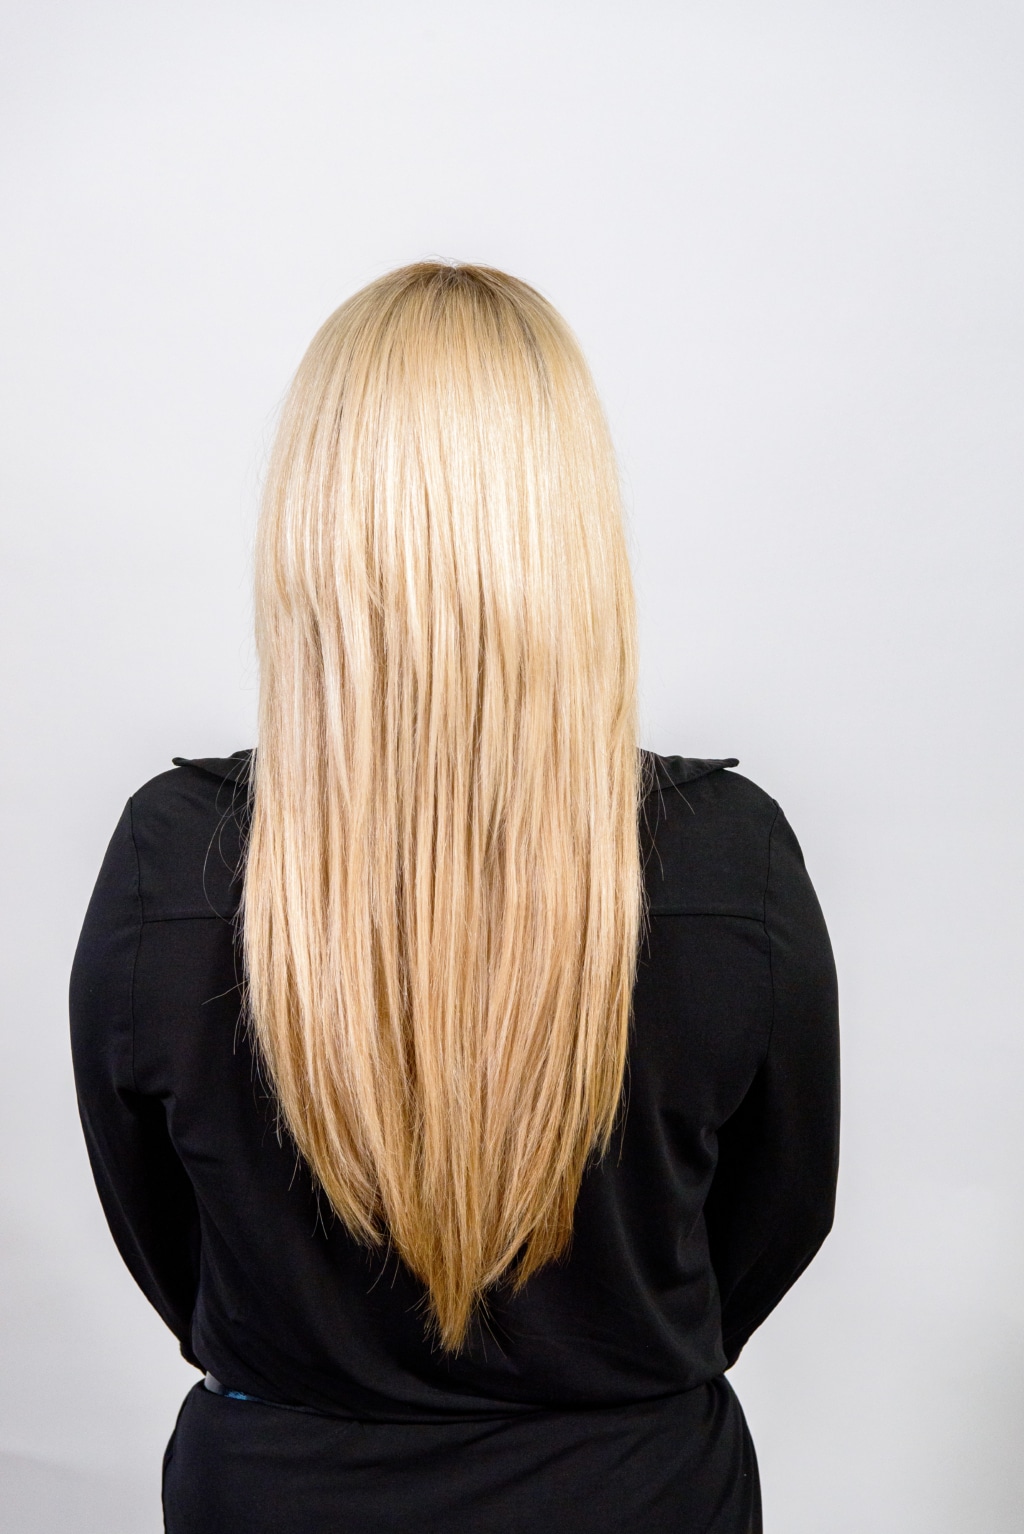 Model with long blonde hair from behind